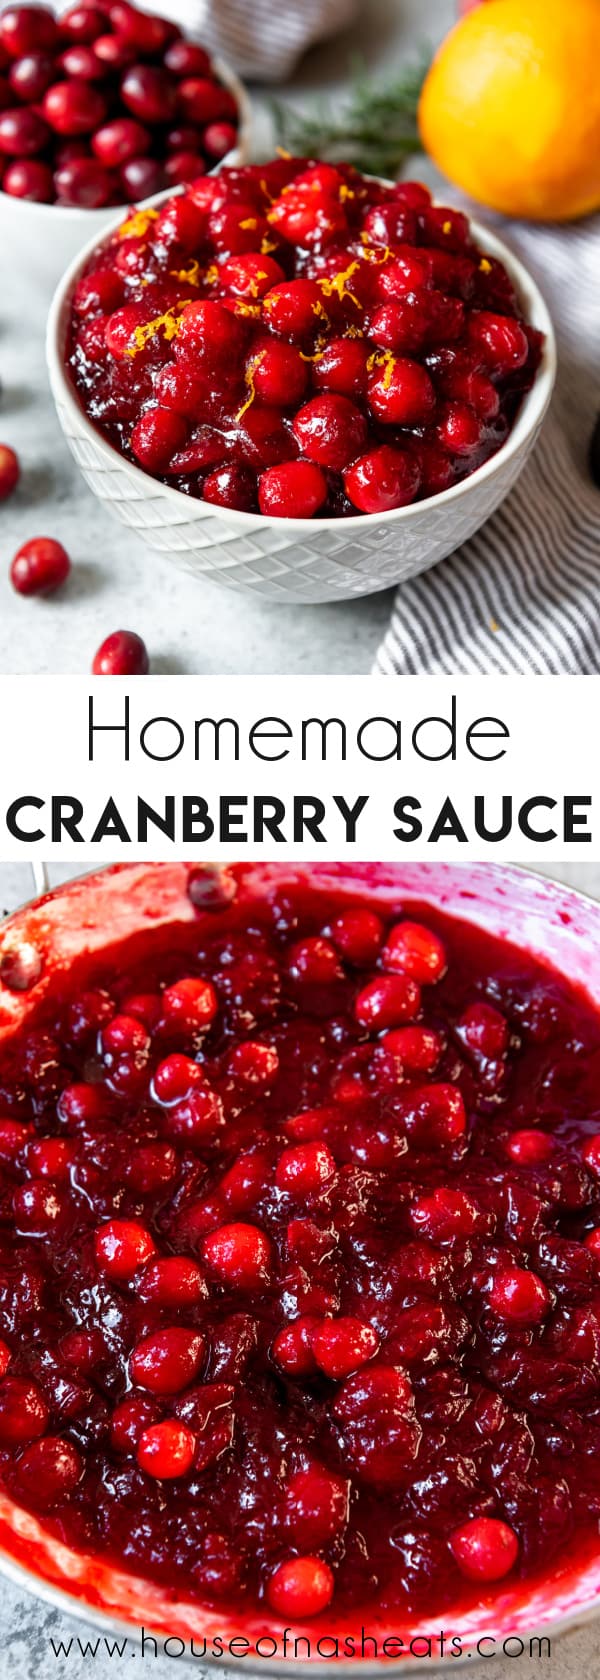 A collage of images of fresh homemade cranberry sauce with text overlay.